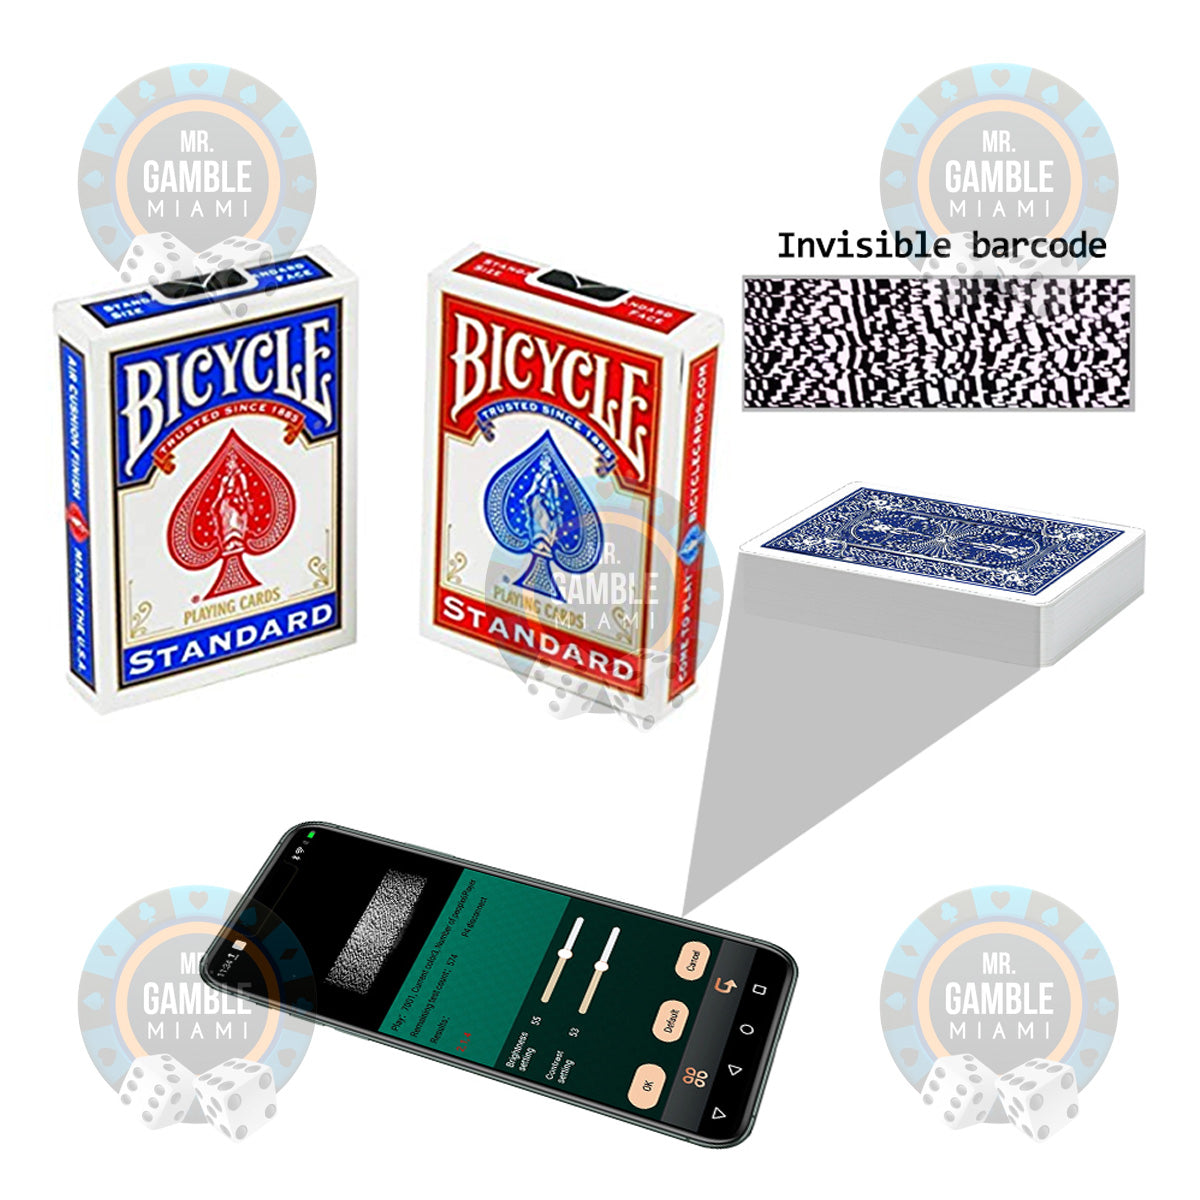 Using the Bicycle standard barcode marked cards and poker analyzer can help you win the poker. The poker cheating devices are very easy to use.